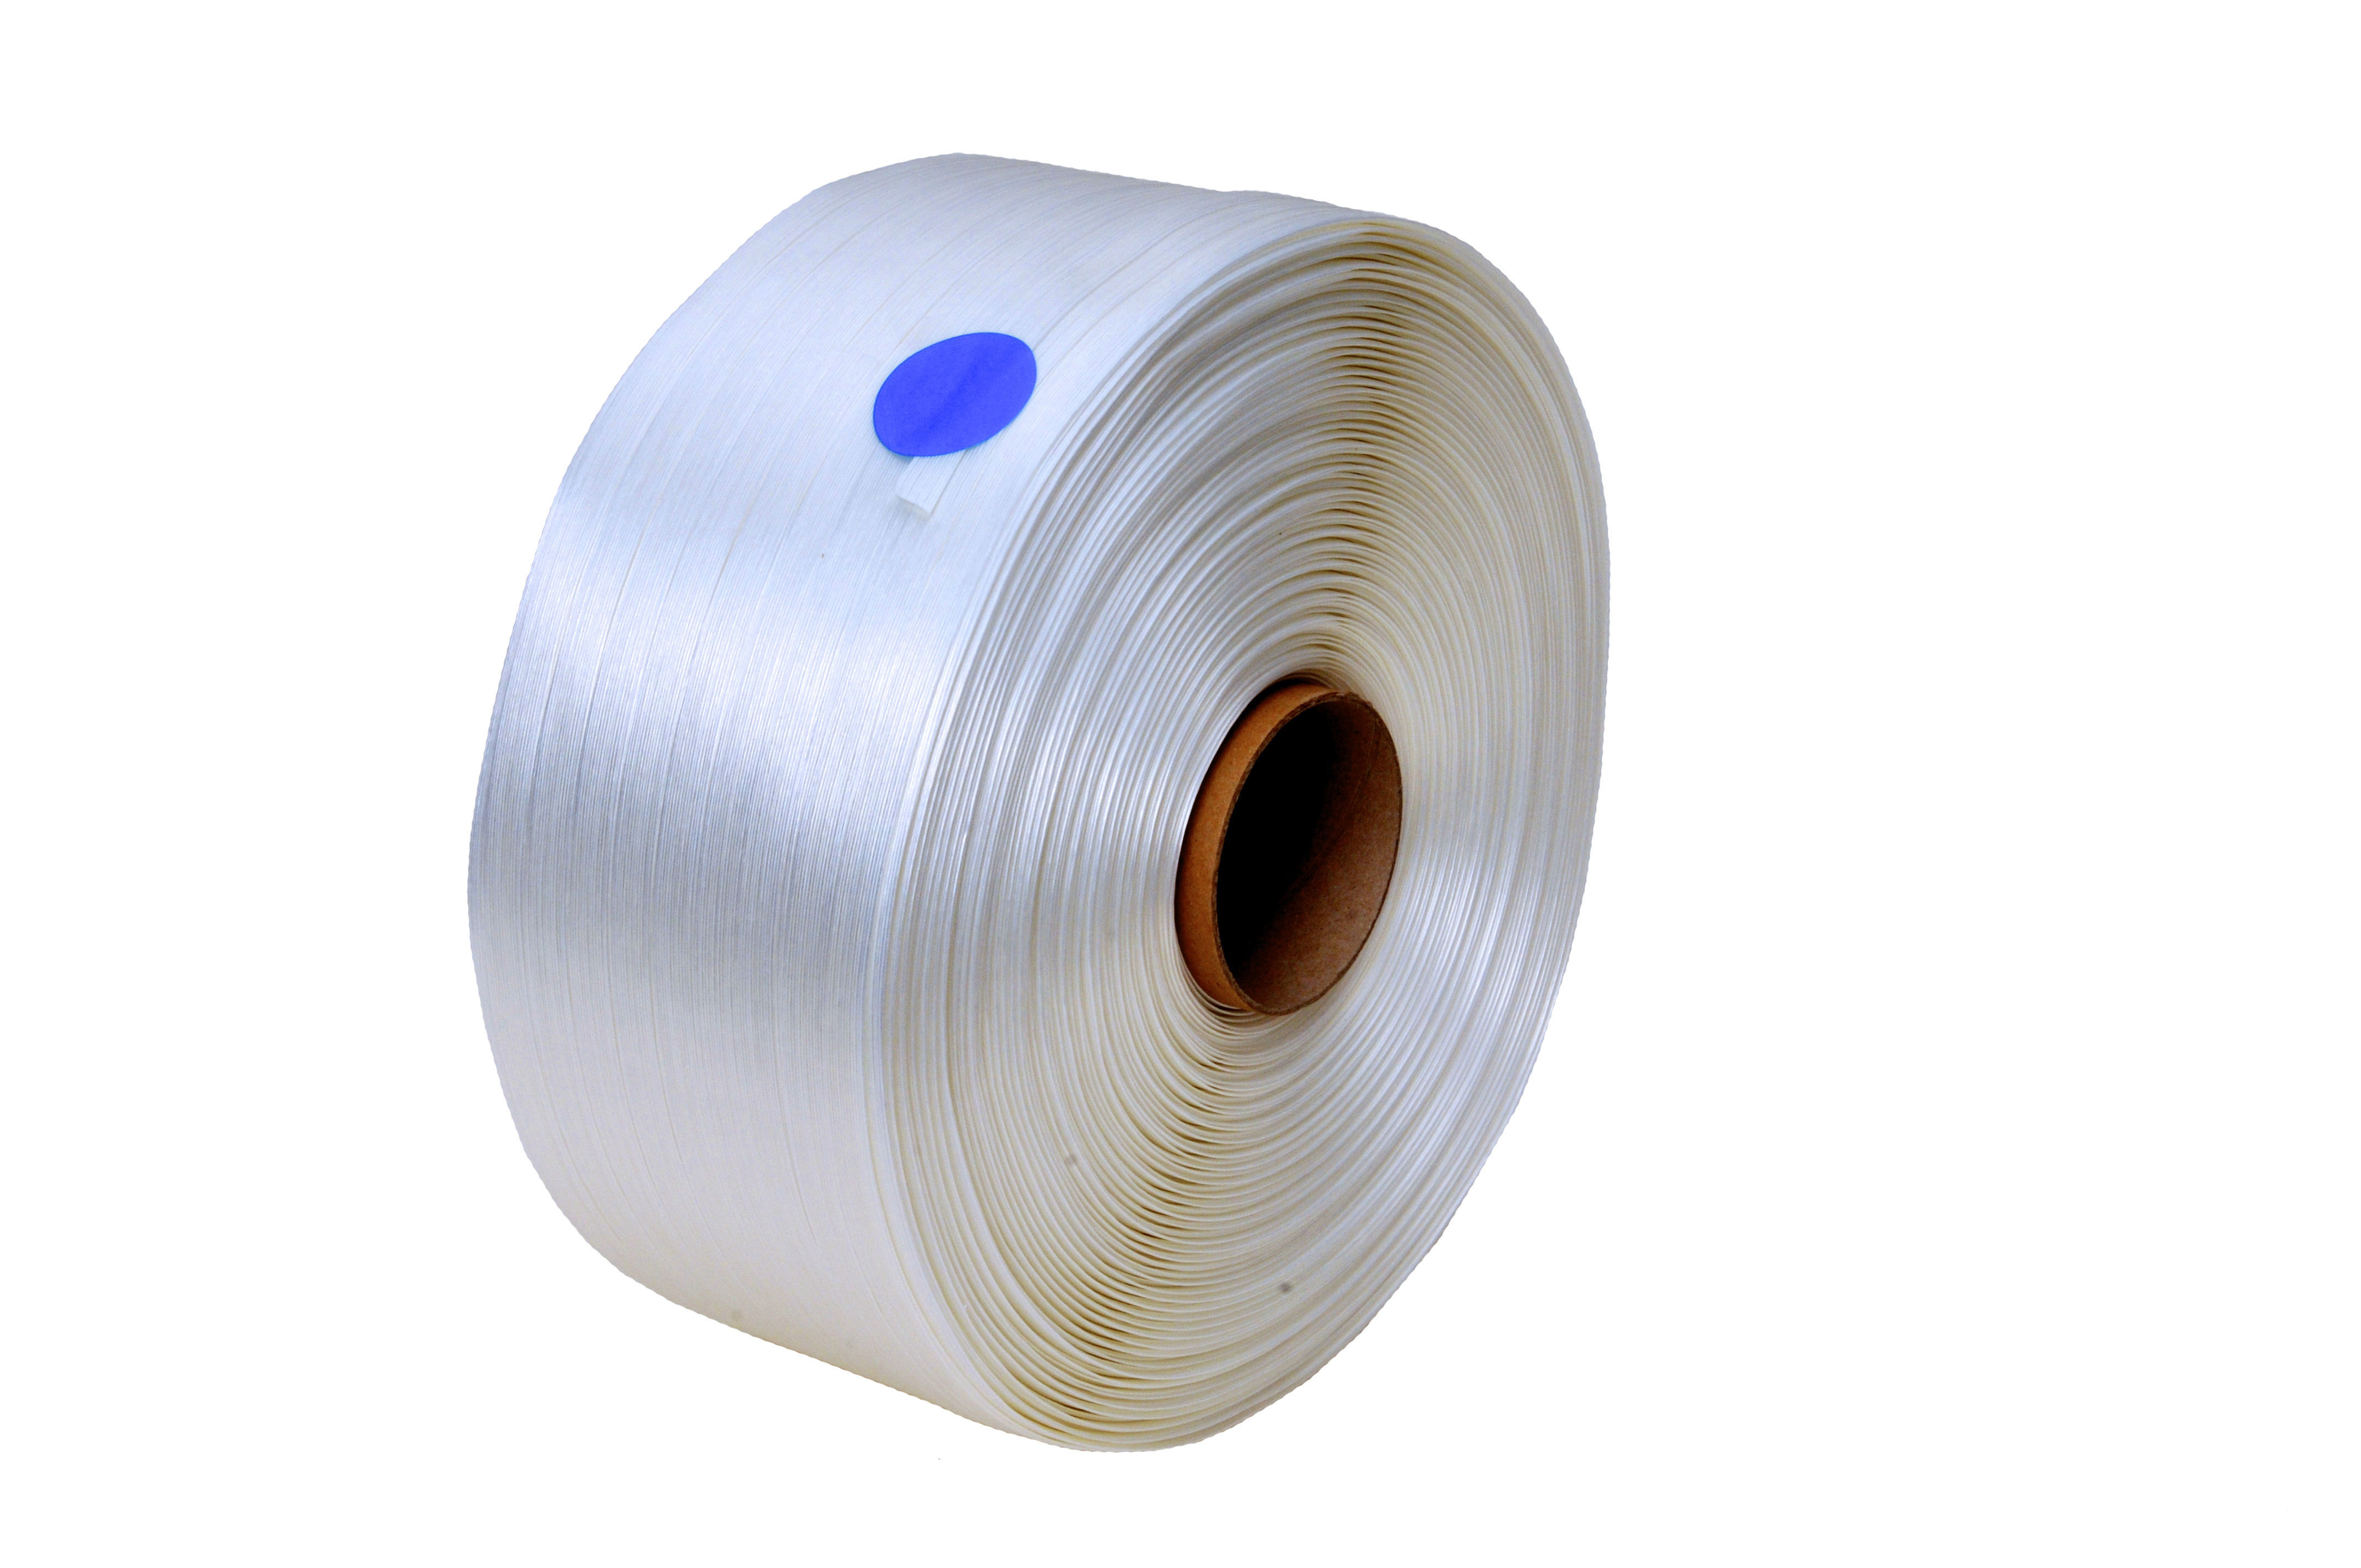 WG band- WG 19mm x 700m/rulle -550kg 2/fp 64pall